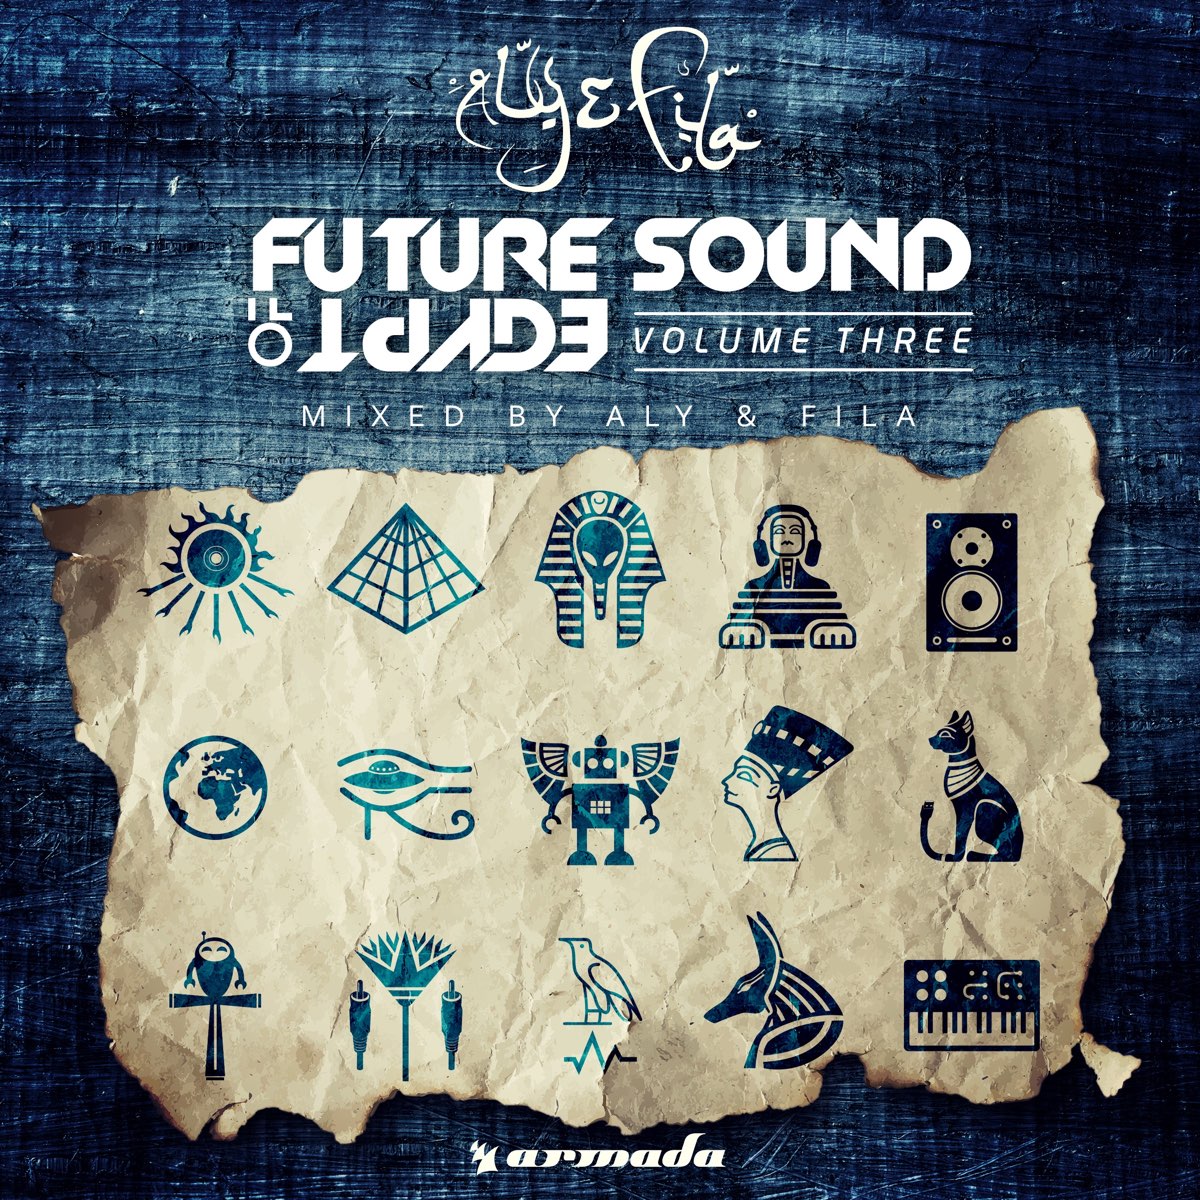 Future Sound of Egypt, Vol. 3 (Mixed by Aly & Fila) by Aly & Fila on Apple  Music